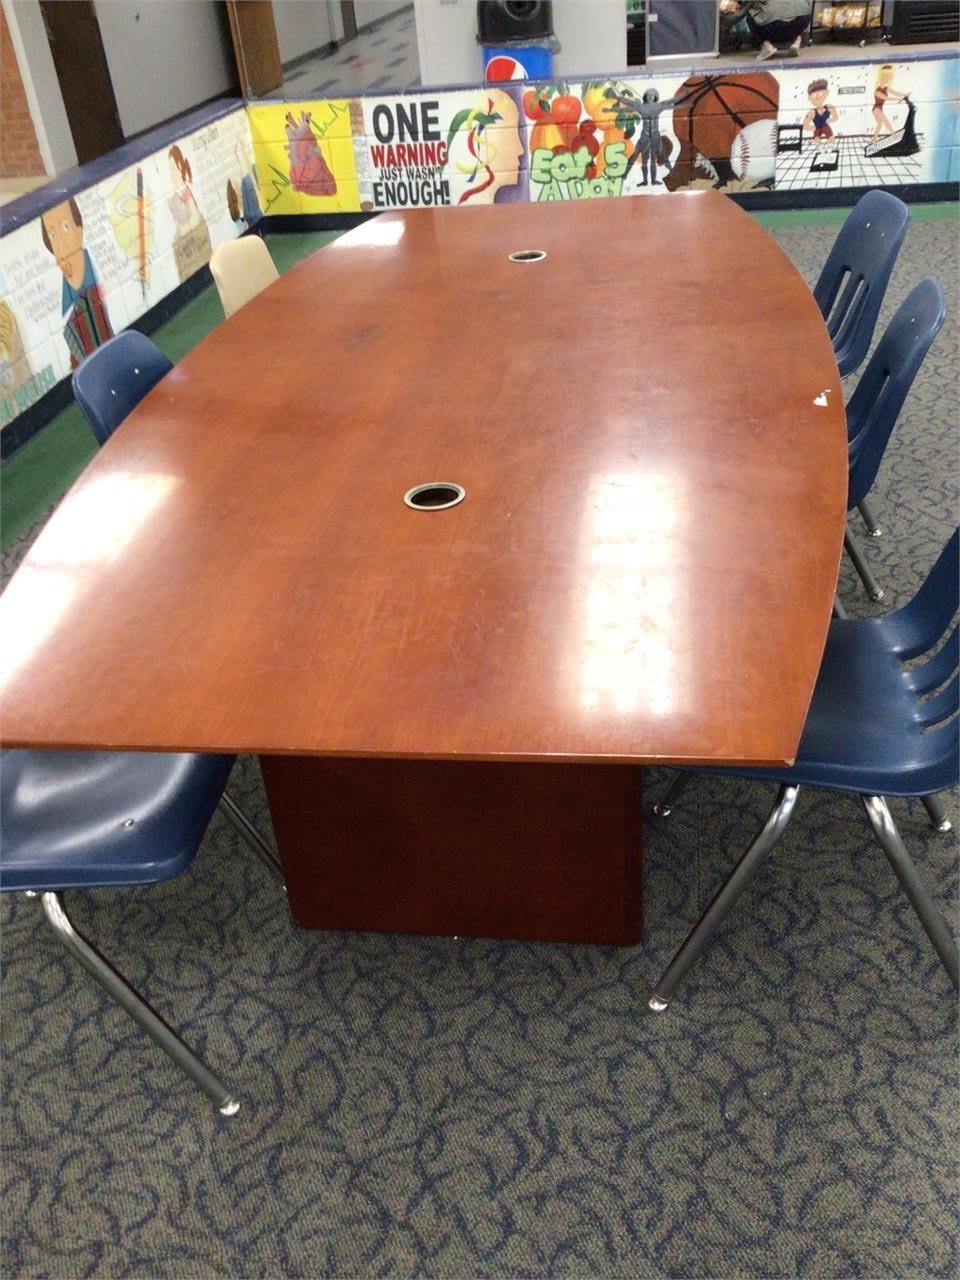 4/23 North Spencer School Corp Cabinets desks chairs